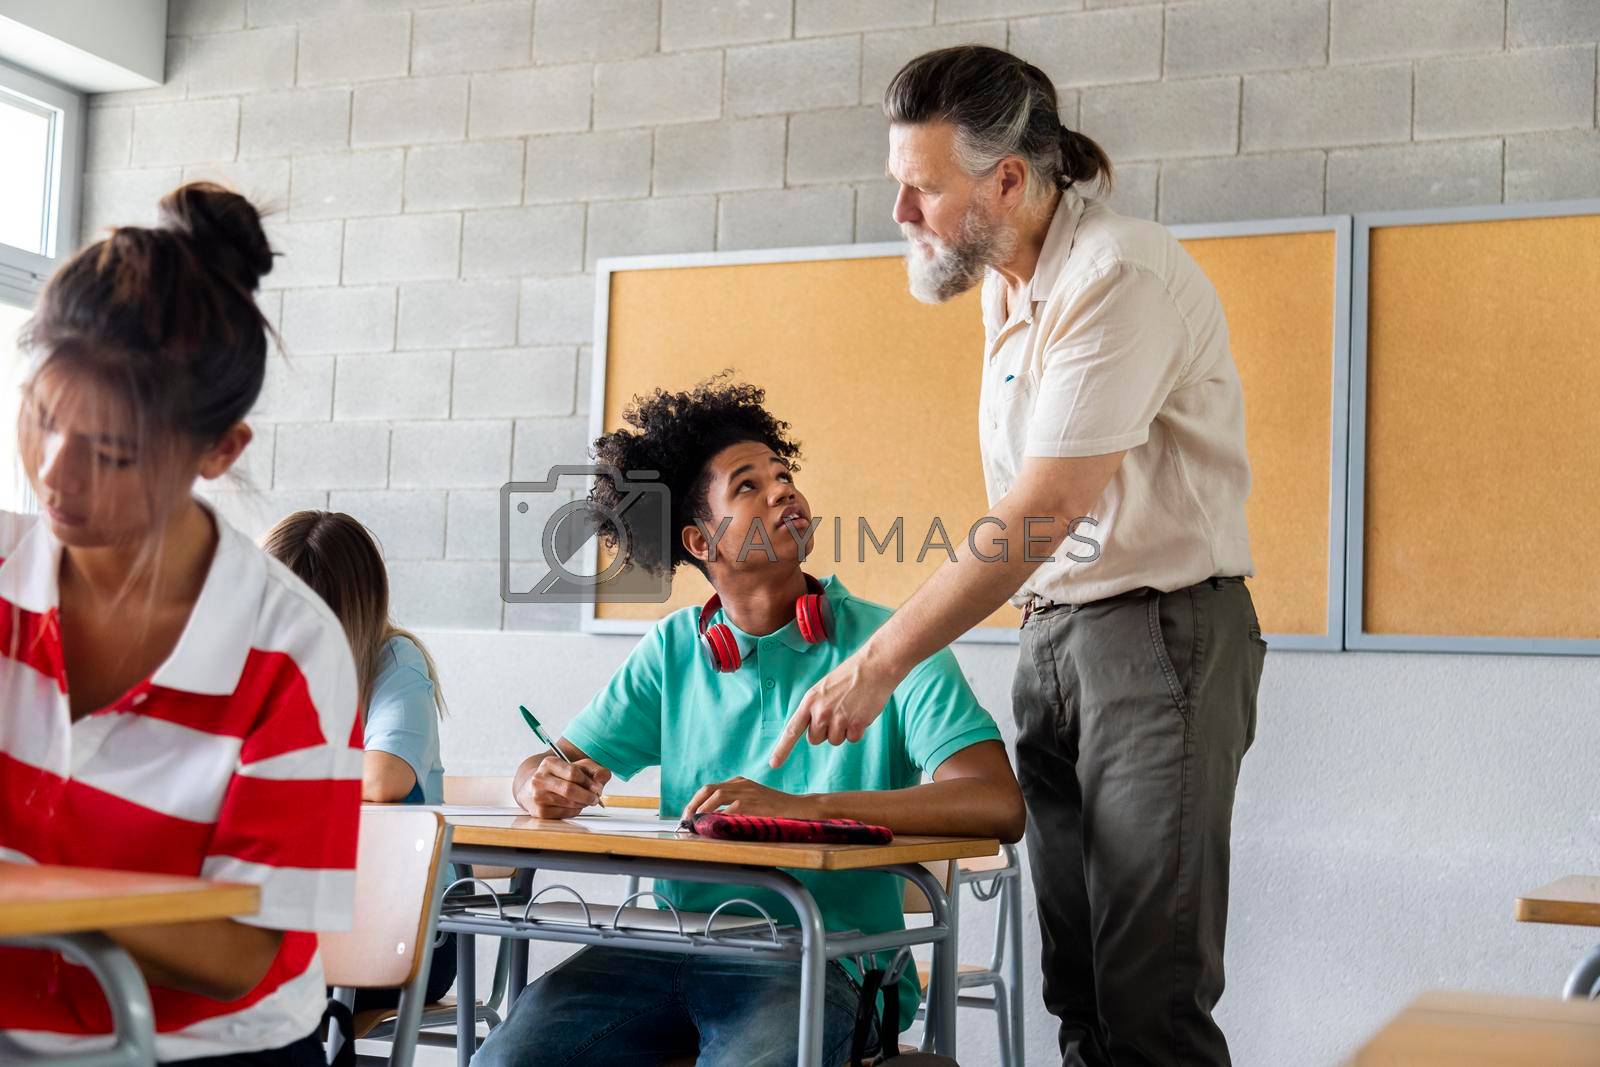 Royalty free image of African american teen boy high school student ask for help with homework to adult mature caucasian male teacher. by Hoverstock